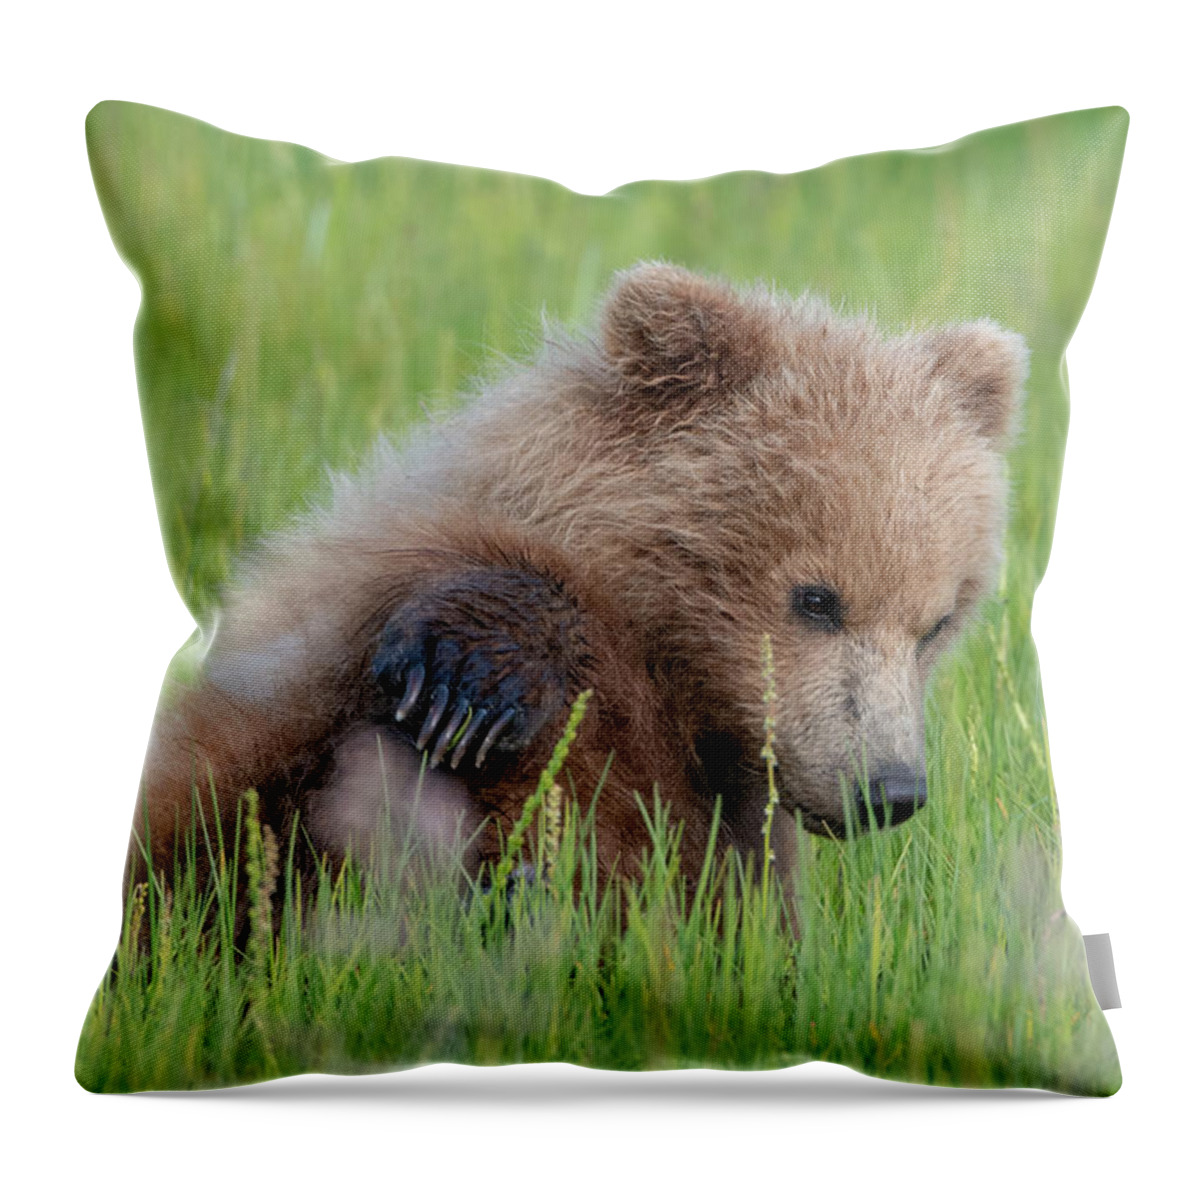 Bear Throw Pillow featuring the photograph A Coy Cub by Mark Hunter